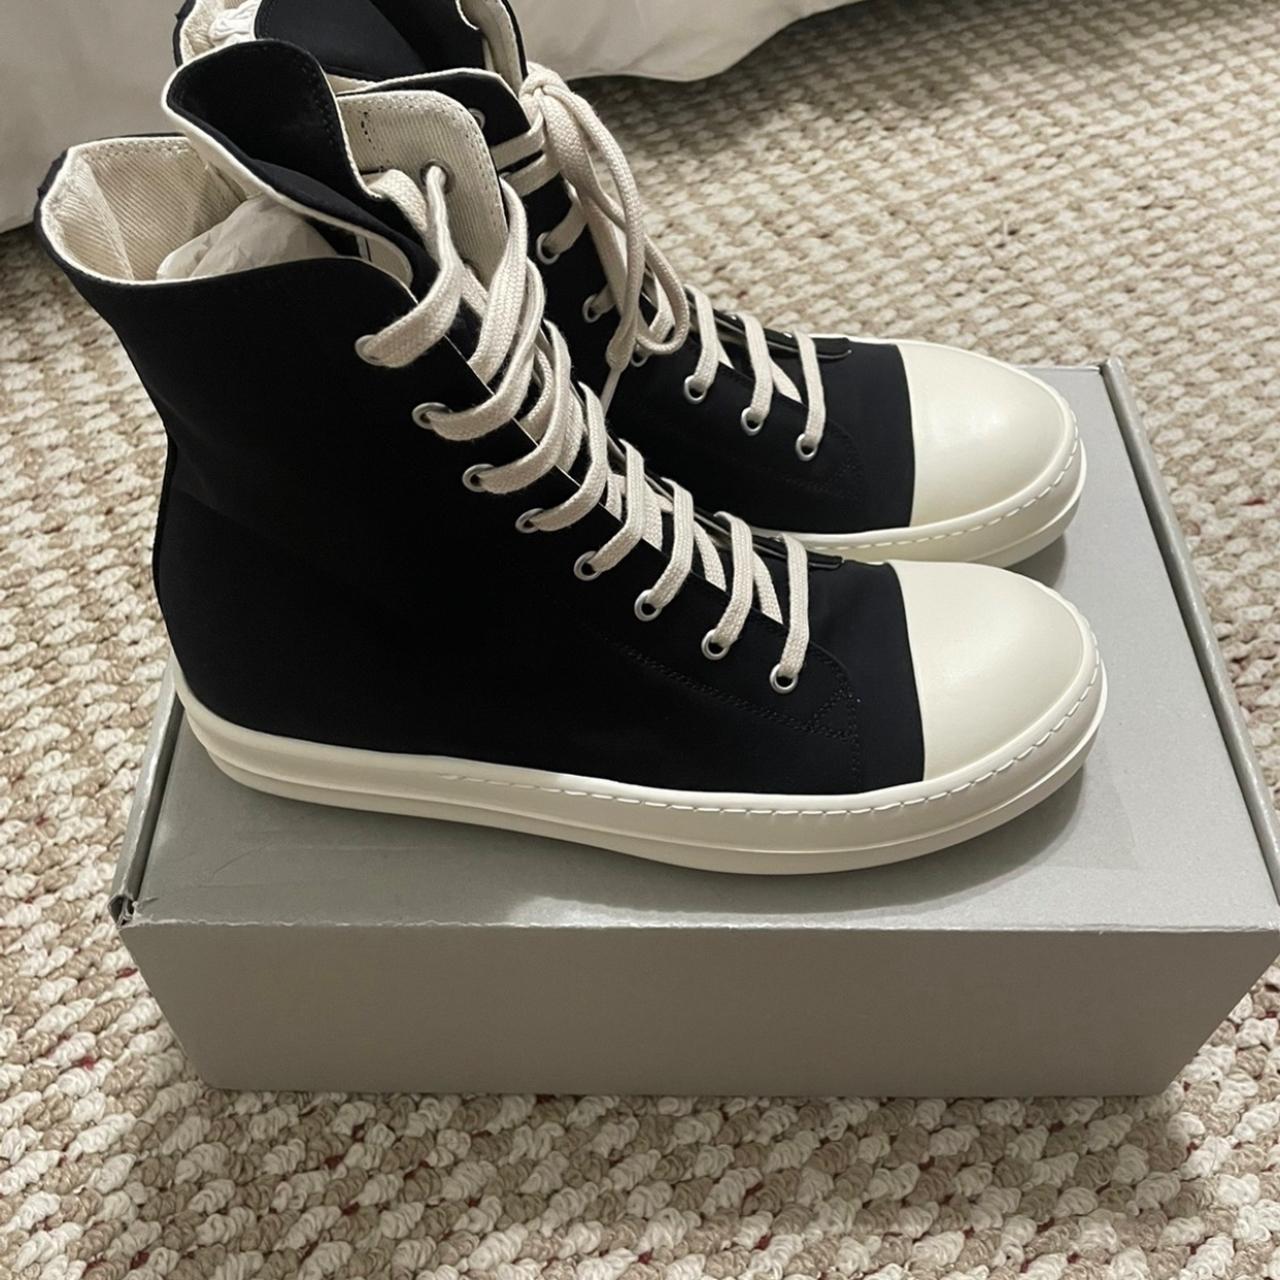 Rick Owens Drkshdw Ramones High Top Comes with box... - Depop